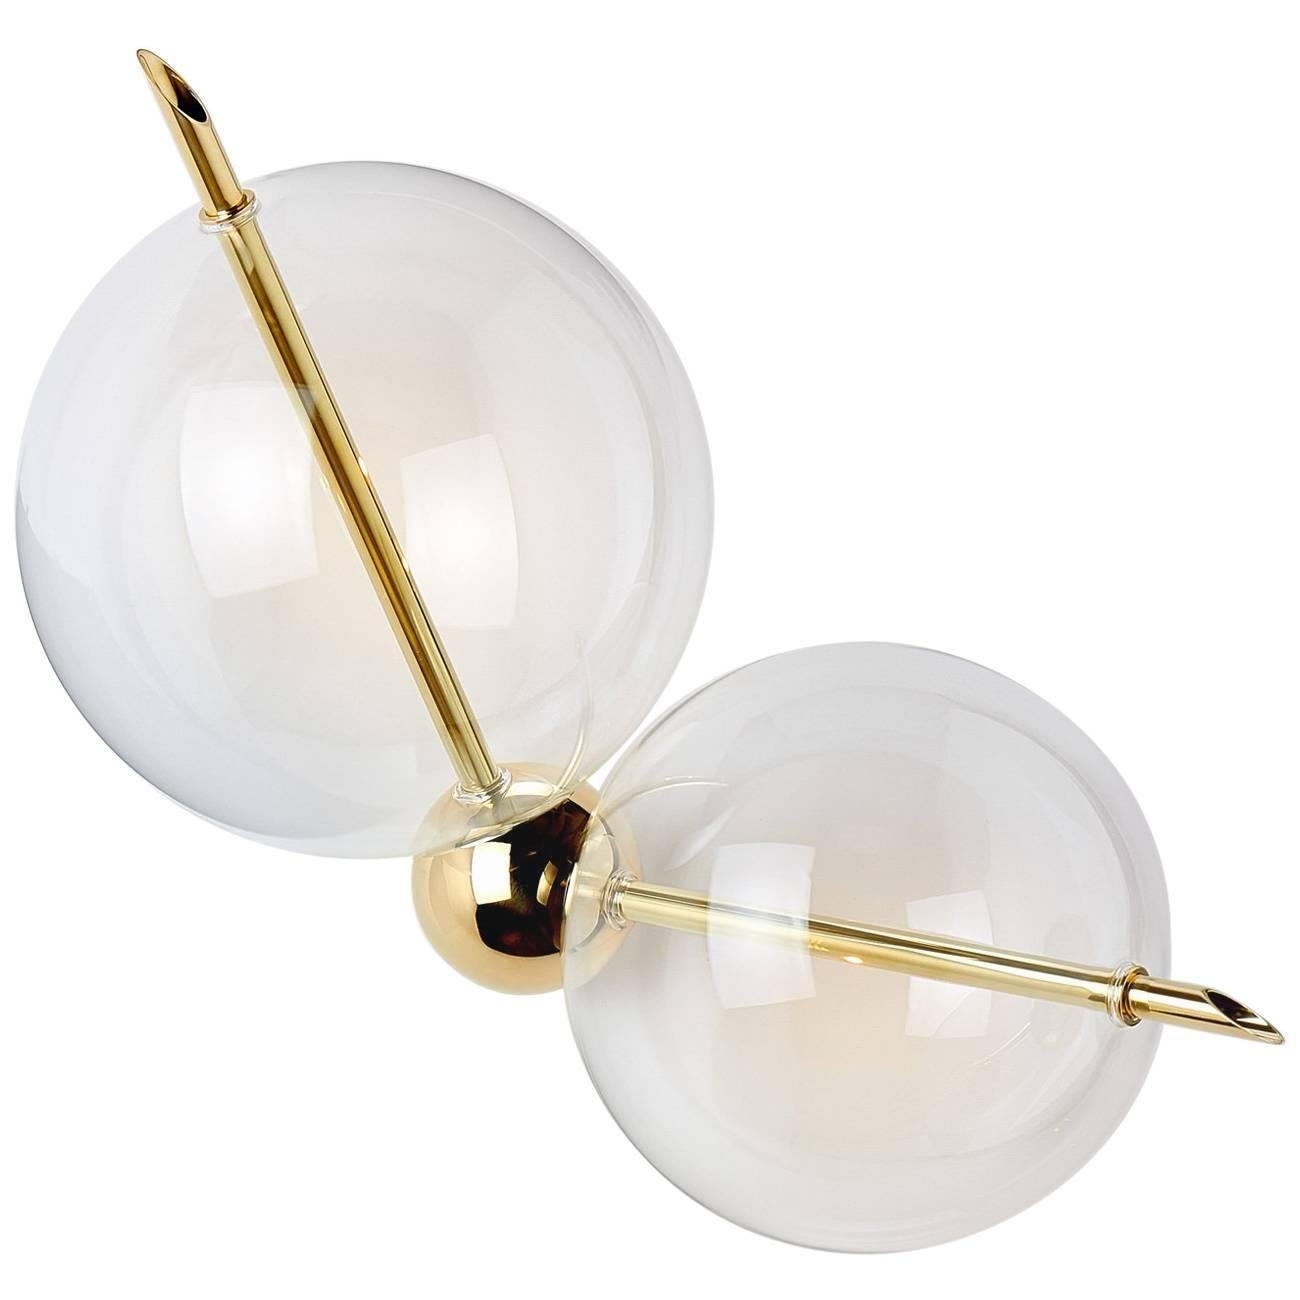 Lune Two Lights Contemporary Sconce / Wall Light Polished Brass Handblown Glass For Sale